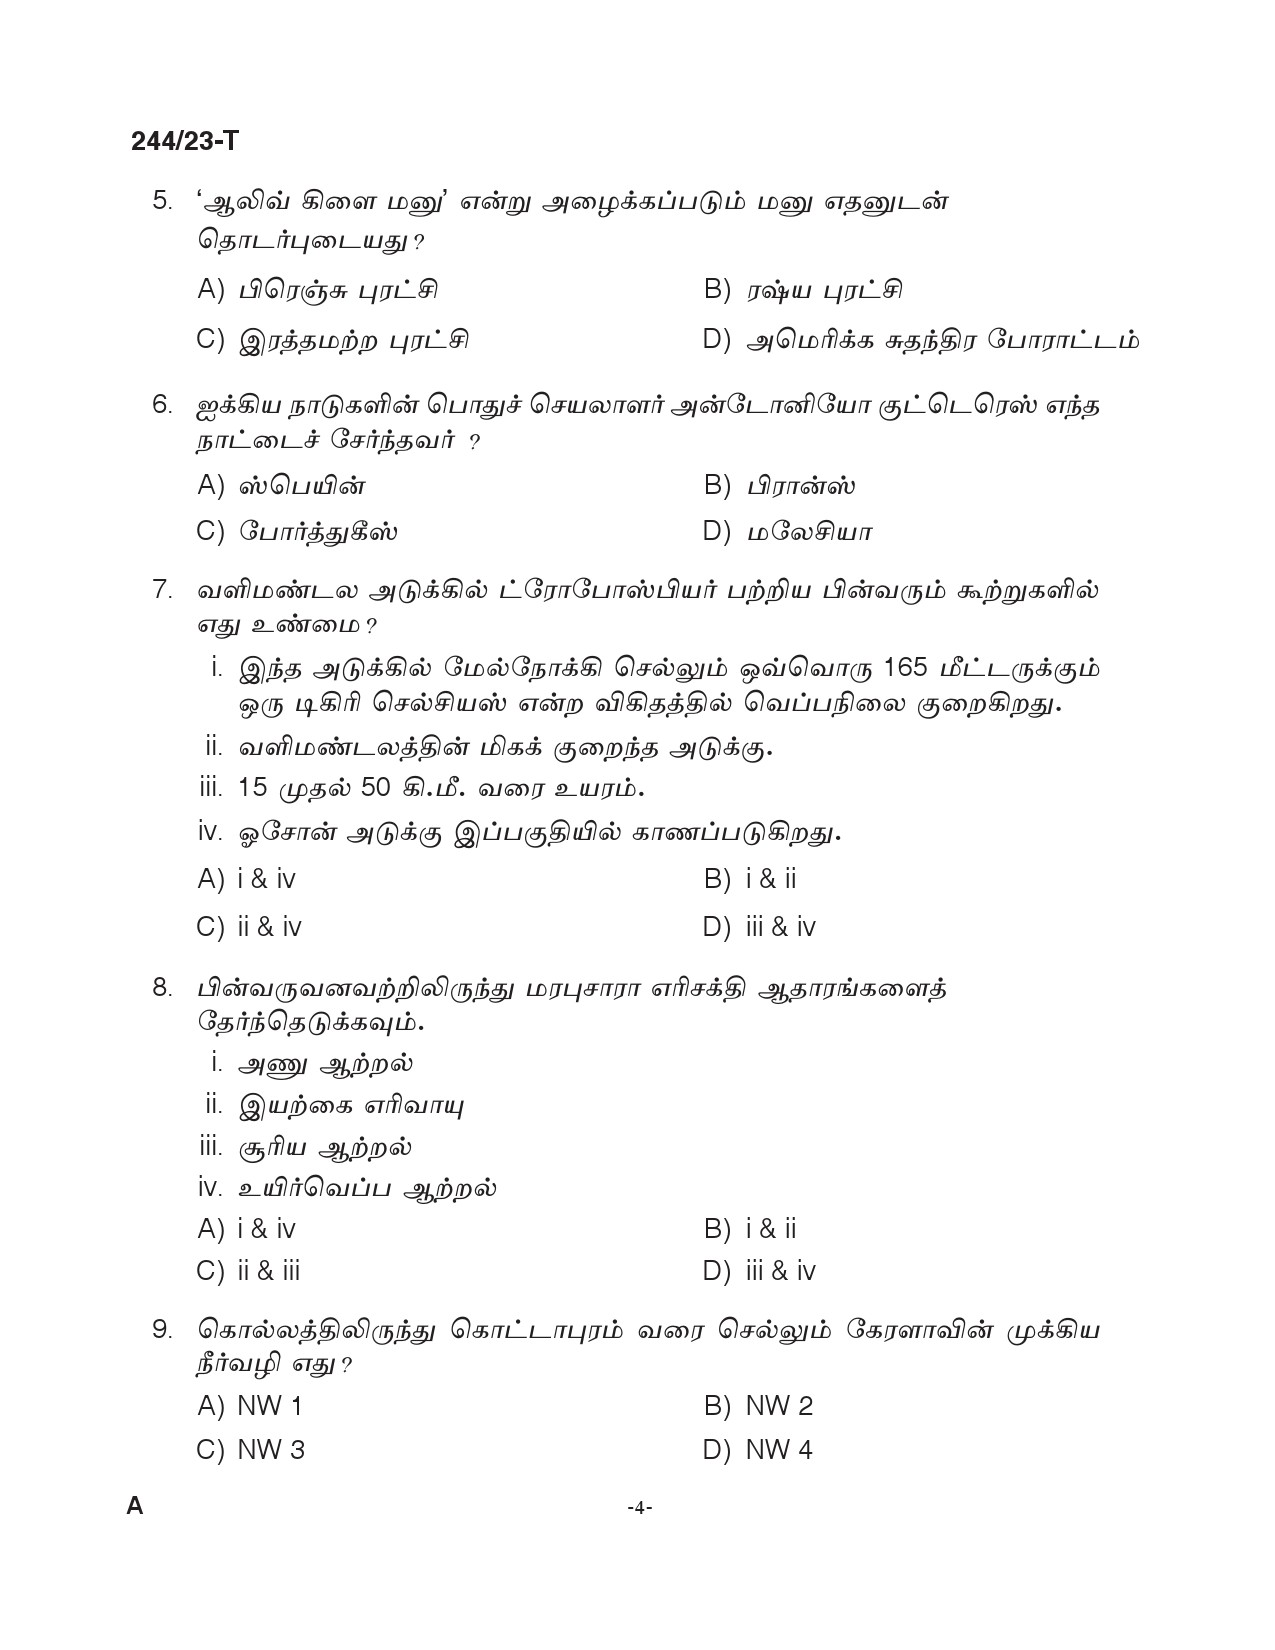 KPSC Fire and Rescue Officer Trainee Tamil Exam 2023 Code 2442023 T 3